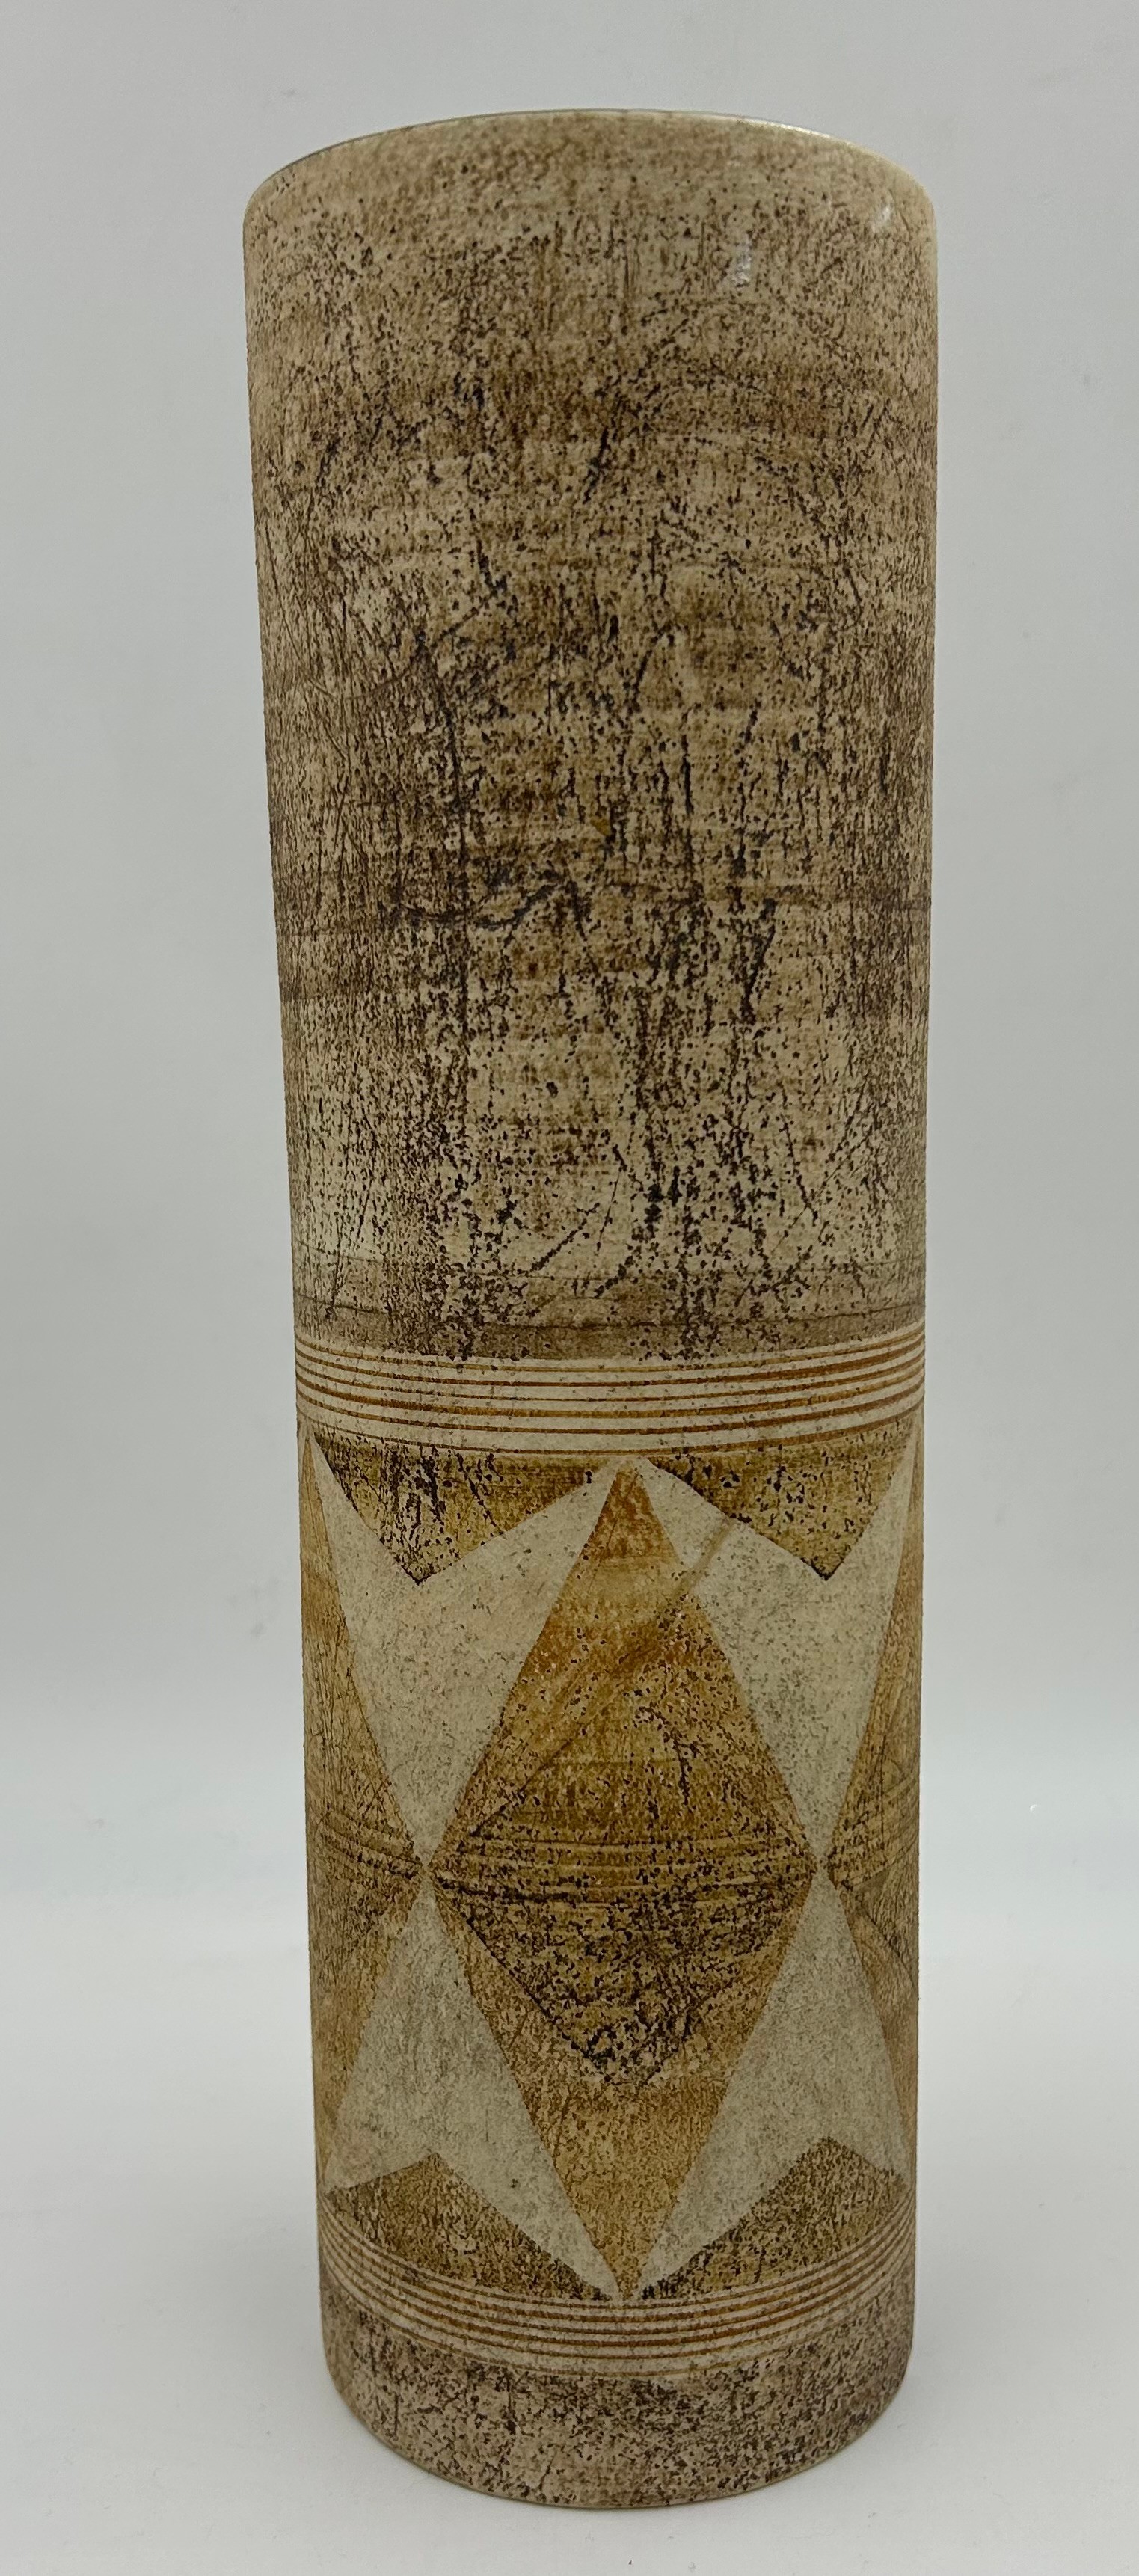 Large cylindrical Troika vase decorated in brown hues and geometric shapes to lower half, 37cm h x